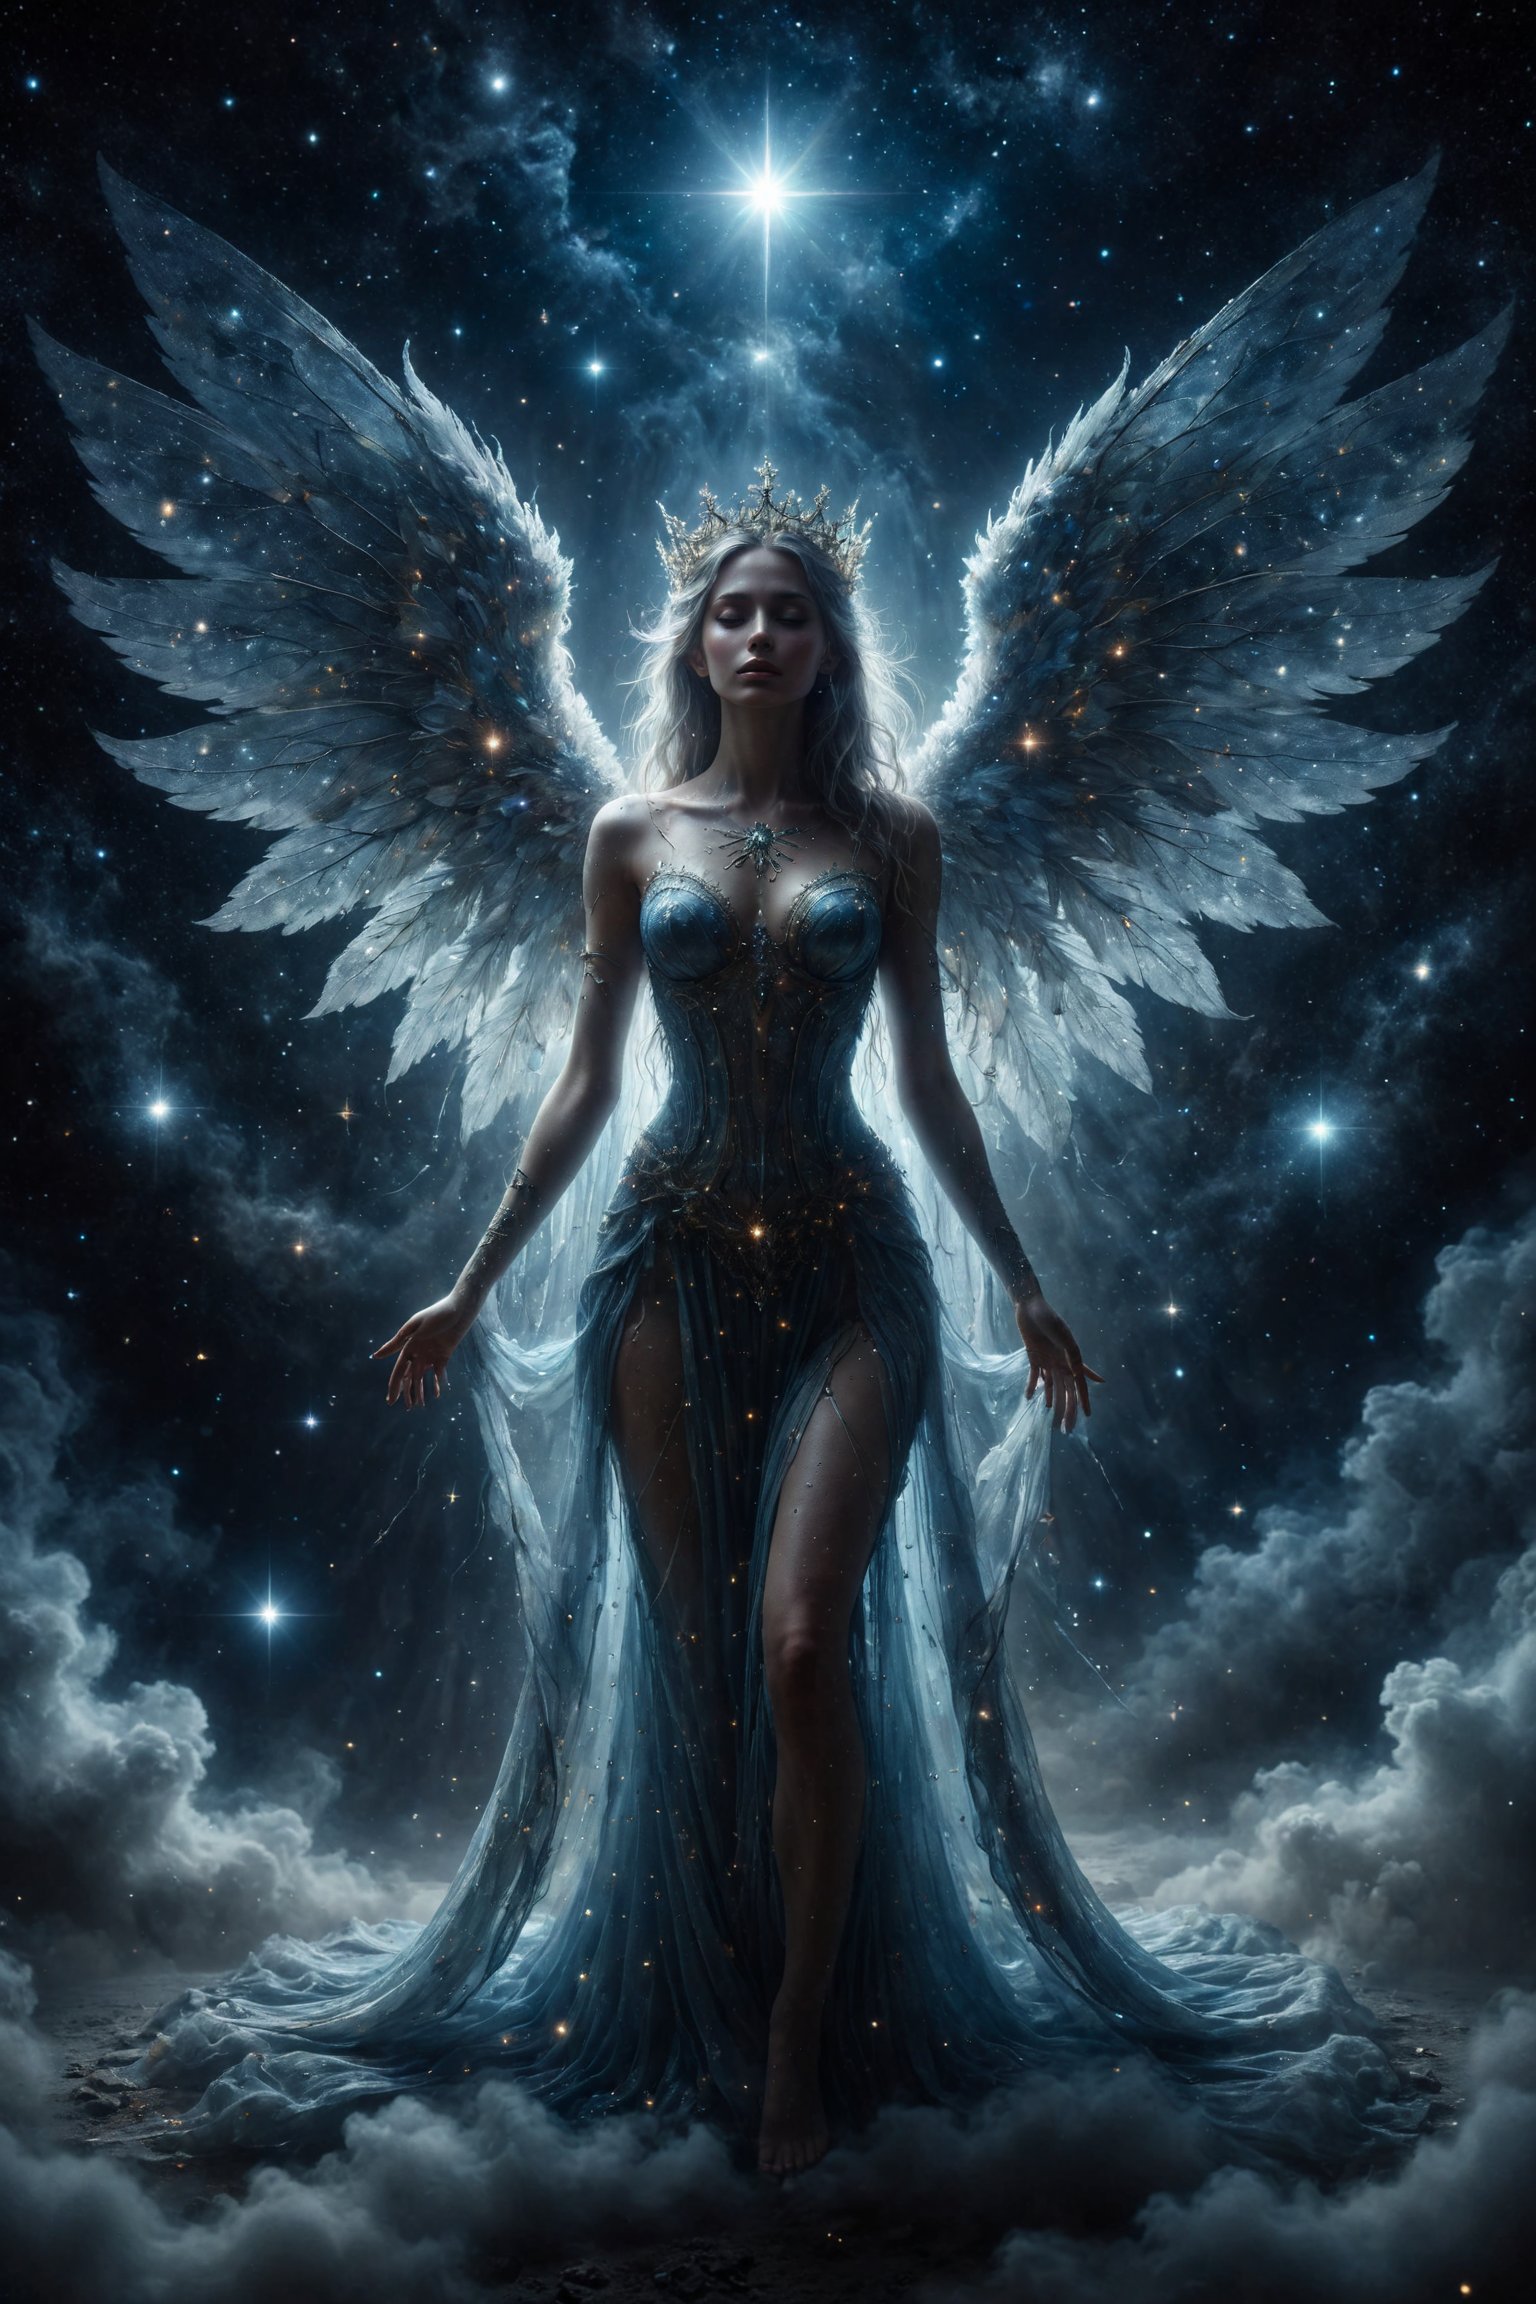 Queen King of stars astrea, full body,She is ethereal and celestial, with her body covered in stars that glow in the dark. It has transparent wings like the night sky and a deep gaze that seems to encompass the universe. His presence emanates peace and cosmic order.